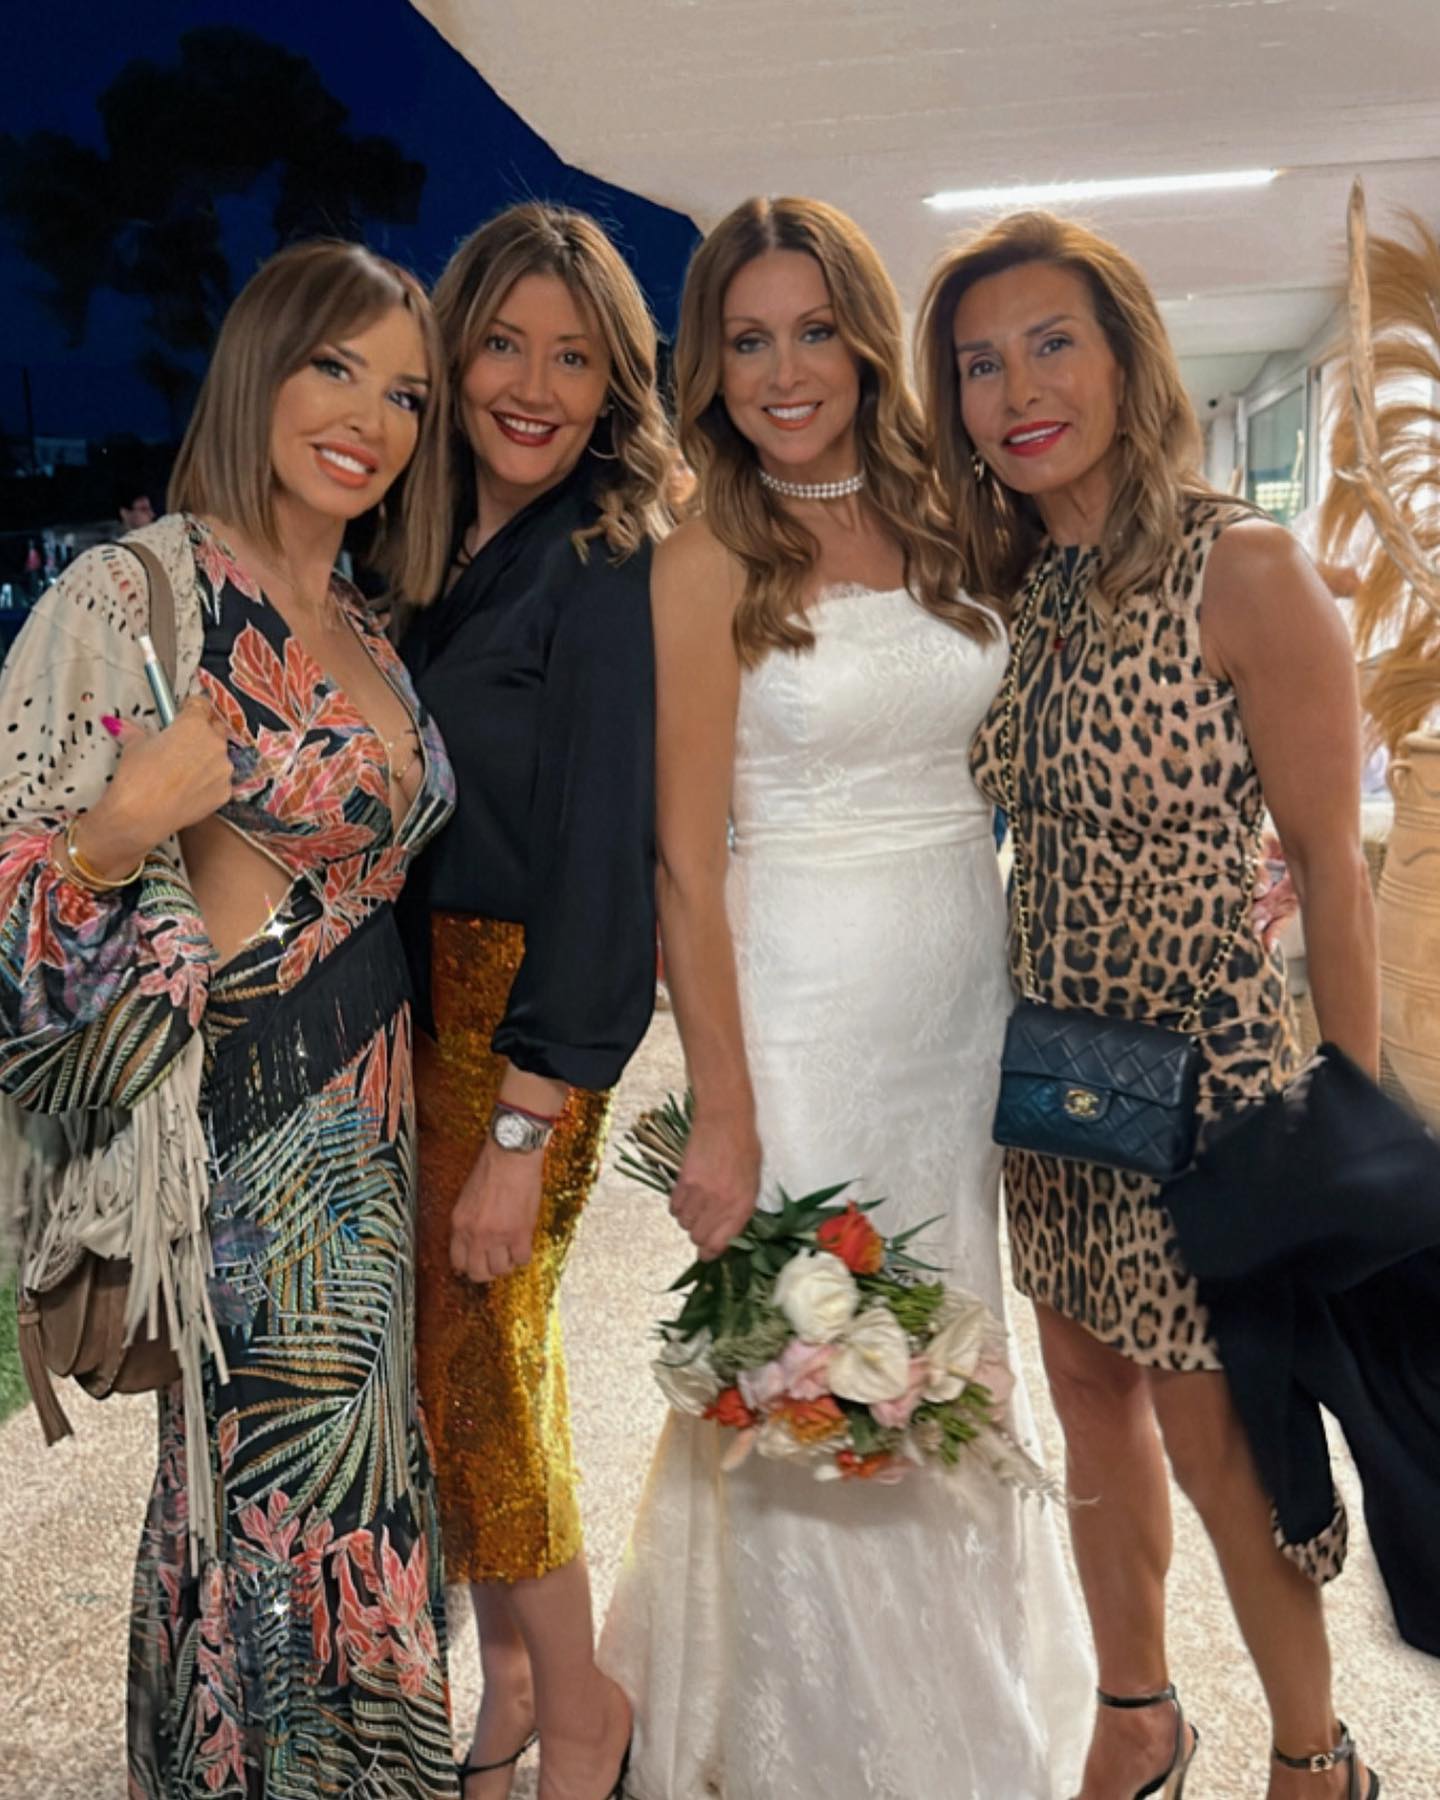 Photo shared by @tinatoska on May 28 2023 tagging @mamargari @vrettouelena and @elina kefi. May be an image of 4 people and wedding